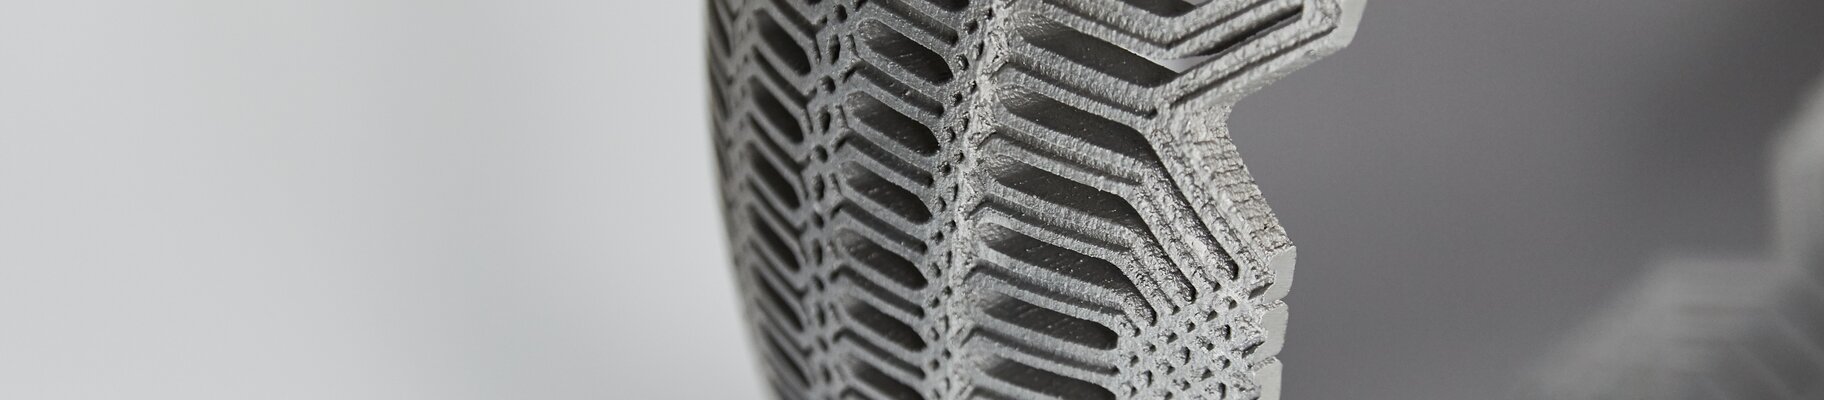 close-up of an 3D printed combustion chamber | © EOS